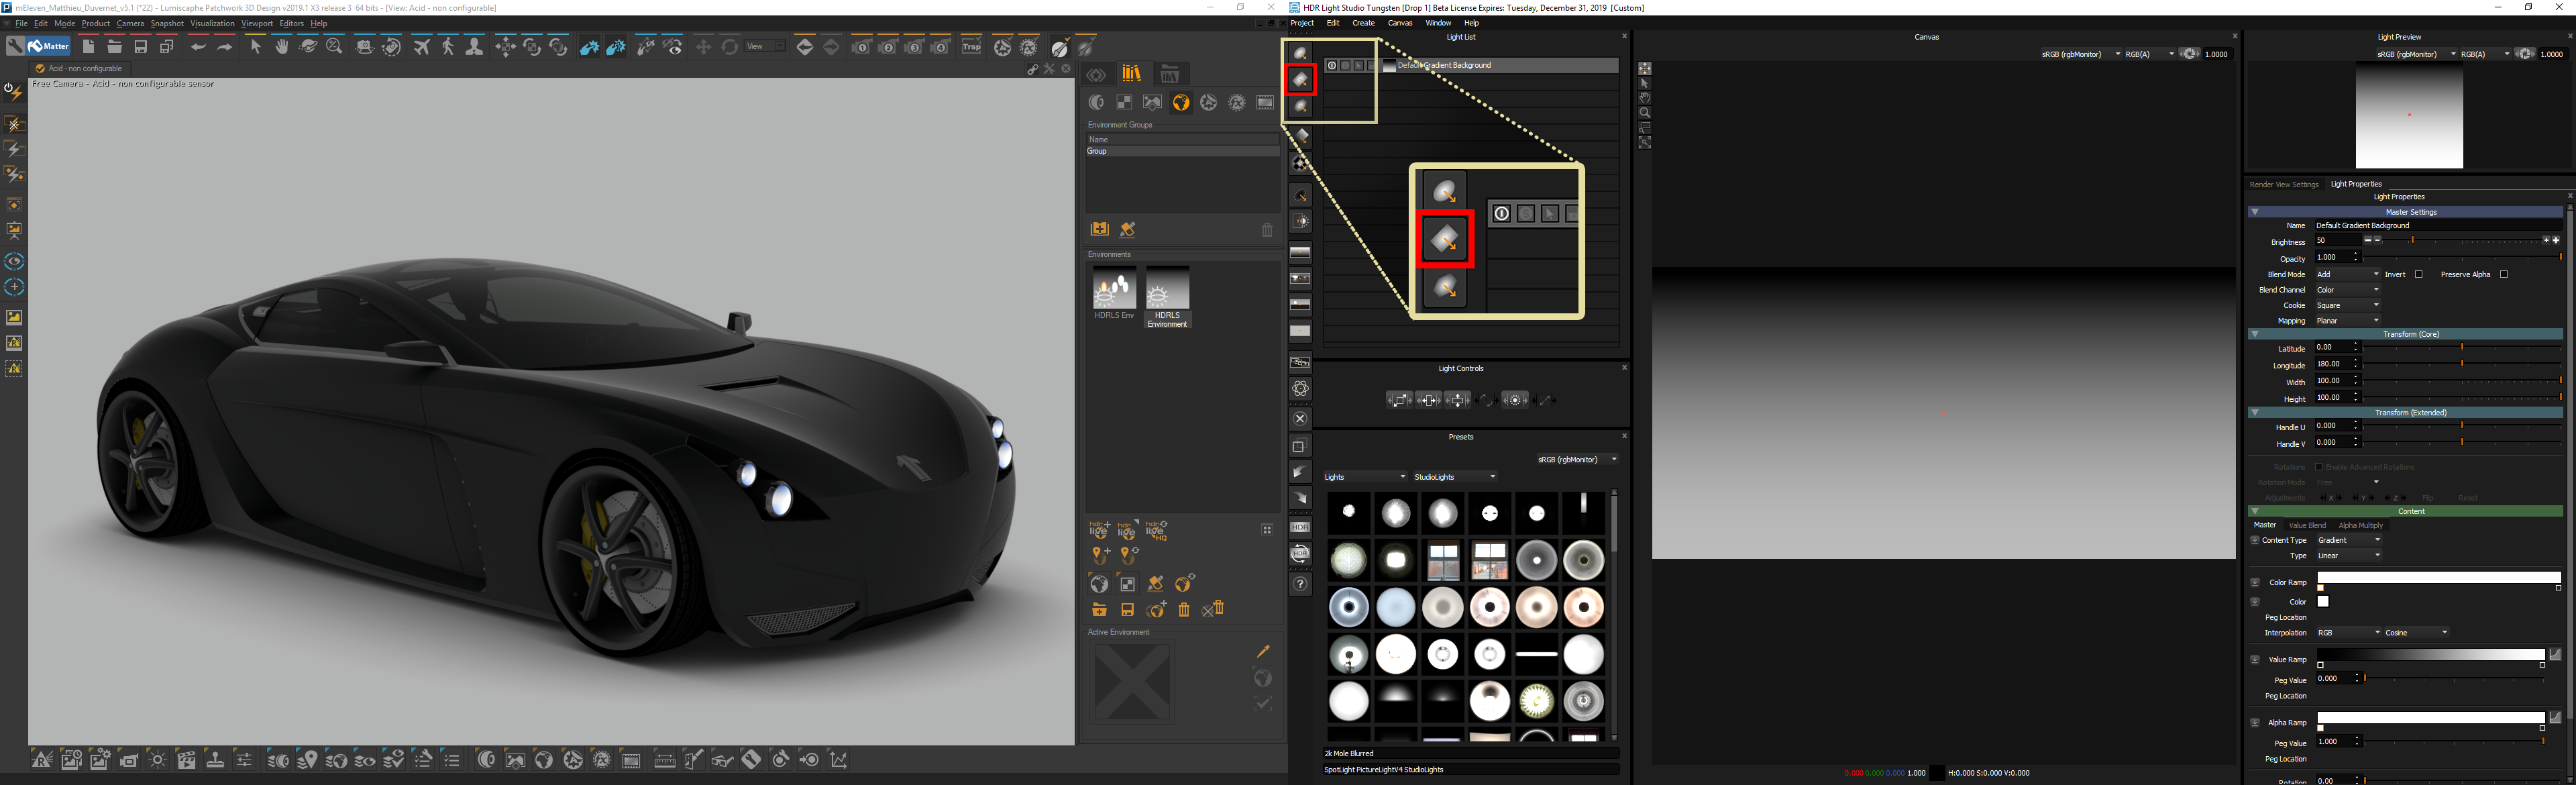 Figure 15:  Selecting a Rect Light from the toolbar on the left in HDR Light Studio 